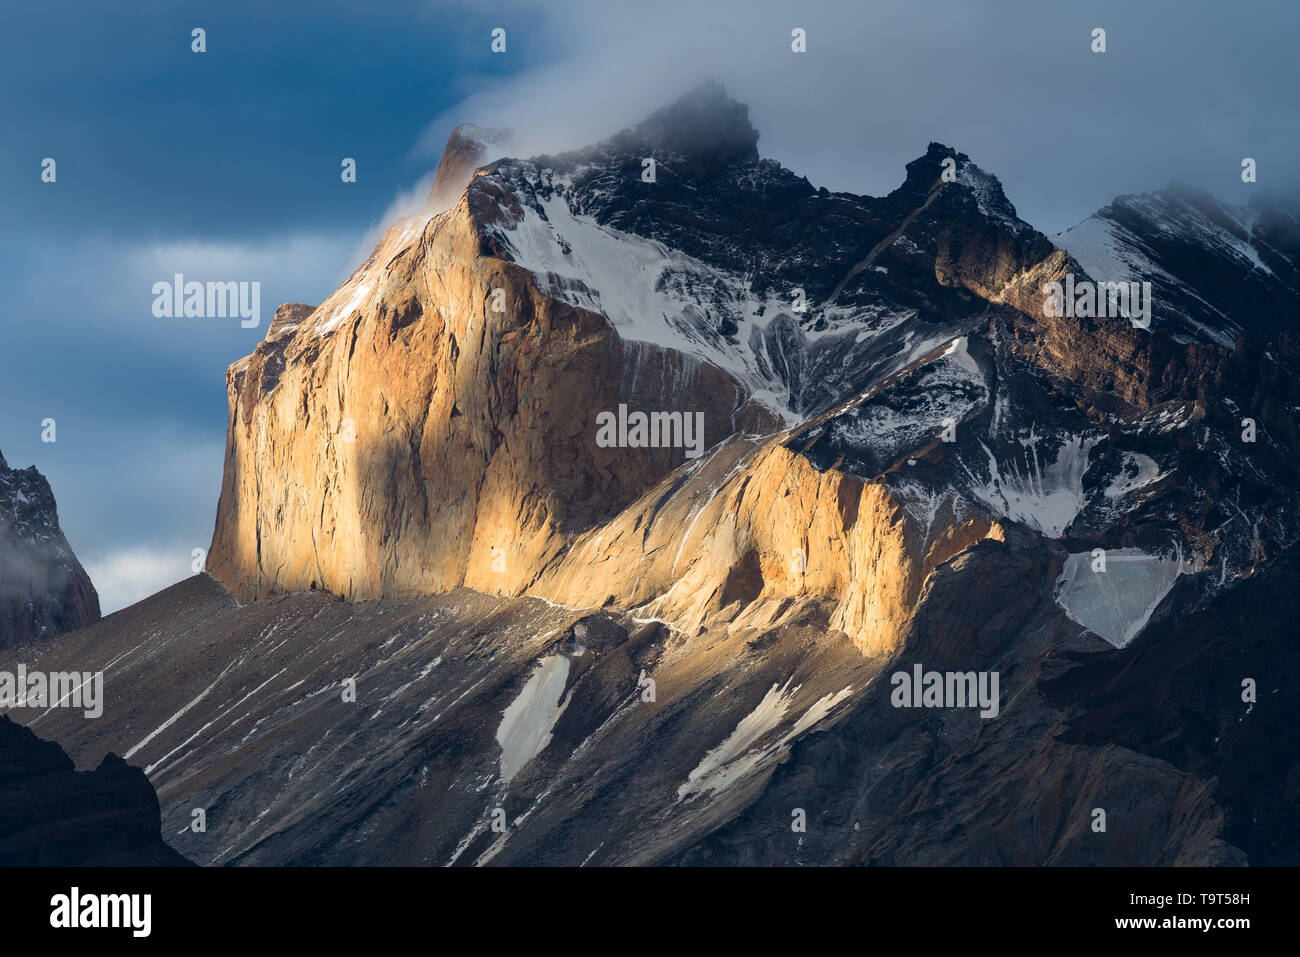 Sunset light illuminates the west face of Monte Almirante Nieto in the Paine Massif in Torres del Paine National Park, a UNESCO World Biosphere Reserv Stock Photo